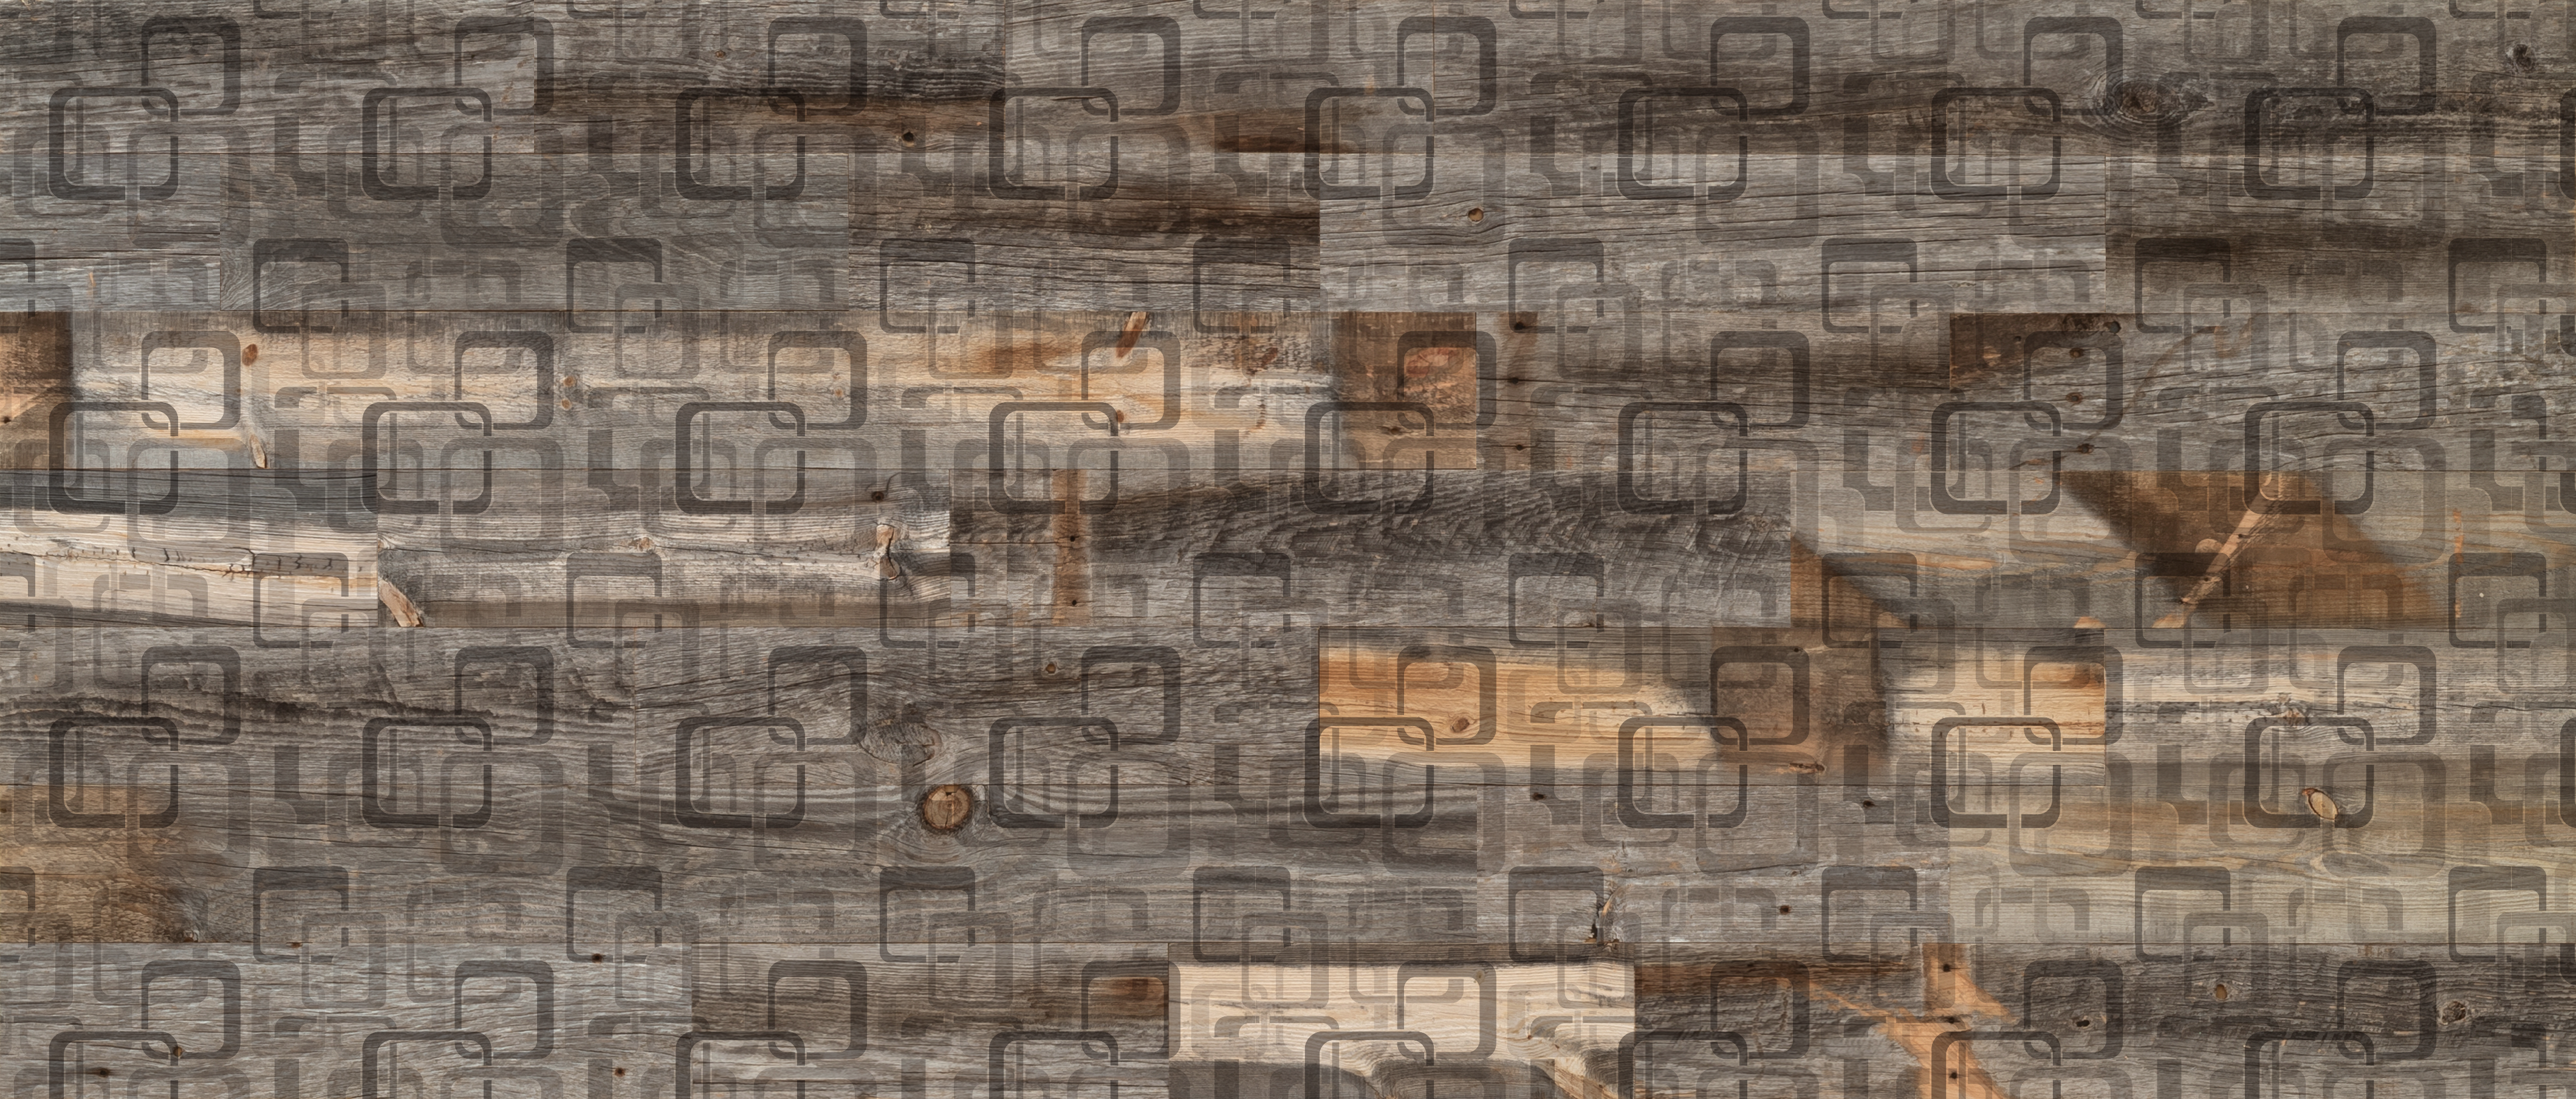 Stikwood Plankprint Weathered Mod Squad material explorer| real reclaimed barnwood pine peel and stick wood wall and ceiling planks with gray, tan, silver and brown colors and a printed pattern..